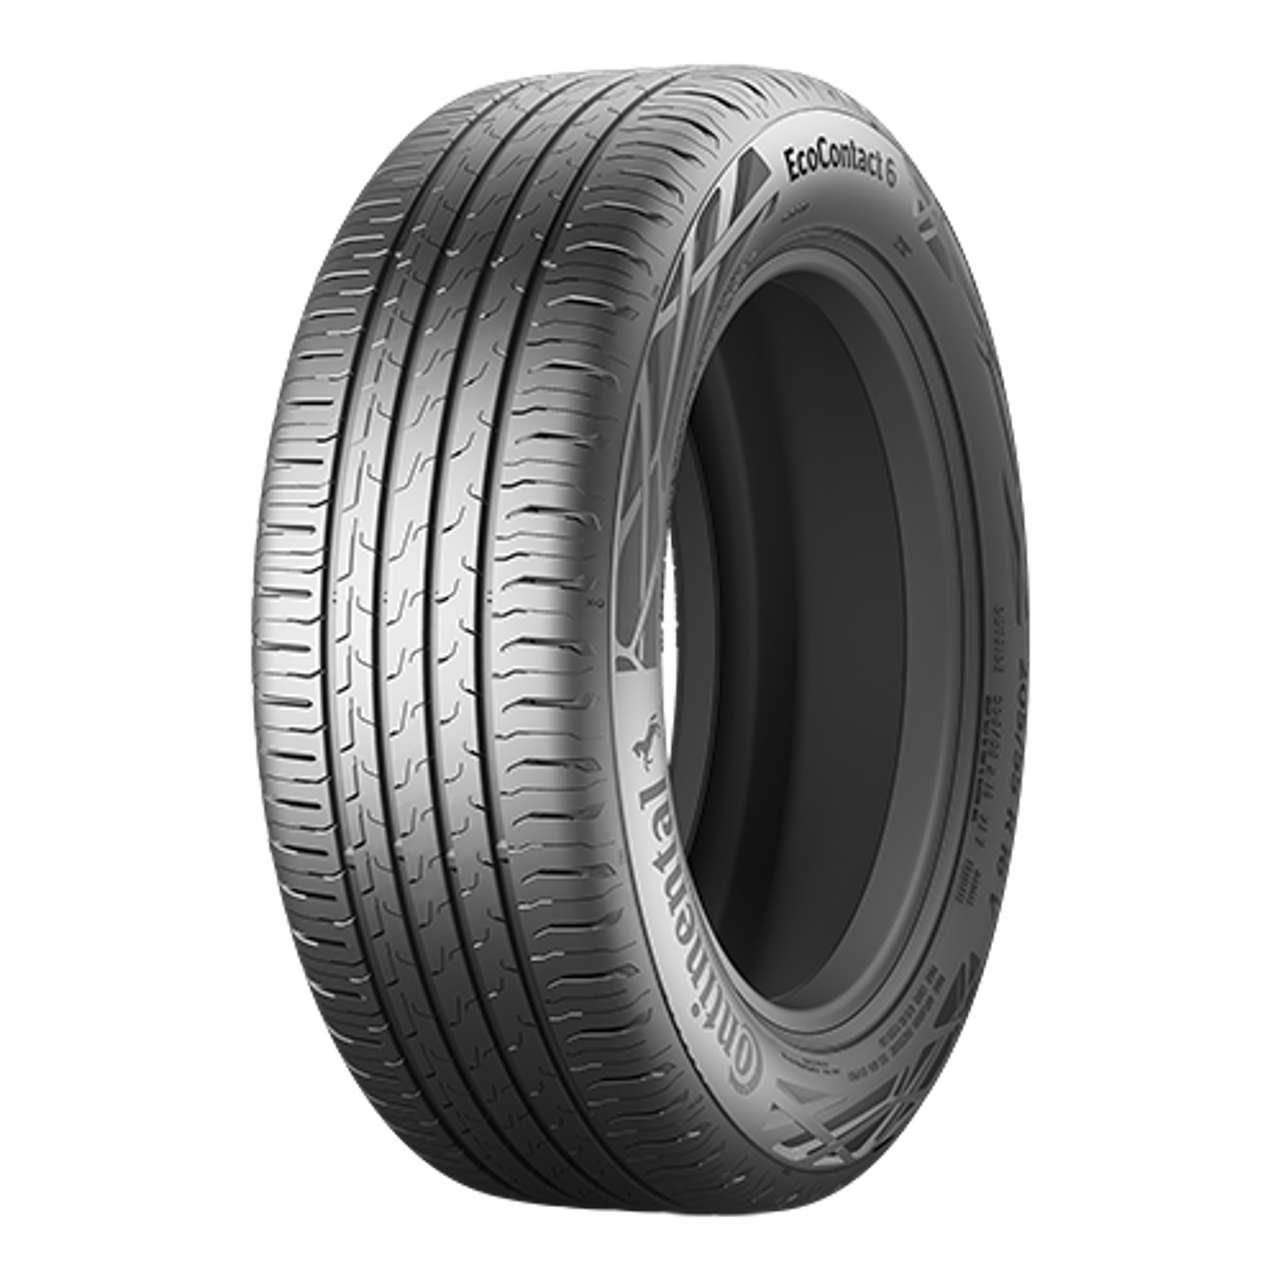 CONTINENTAL ECOCONTACT 6Q (*) (MO) 225/55R18 102Y FR BSW von Continental